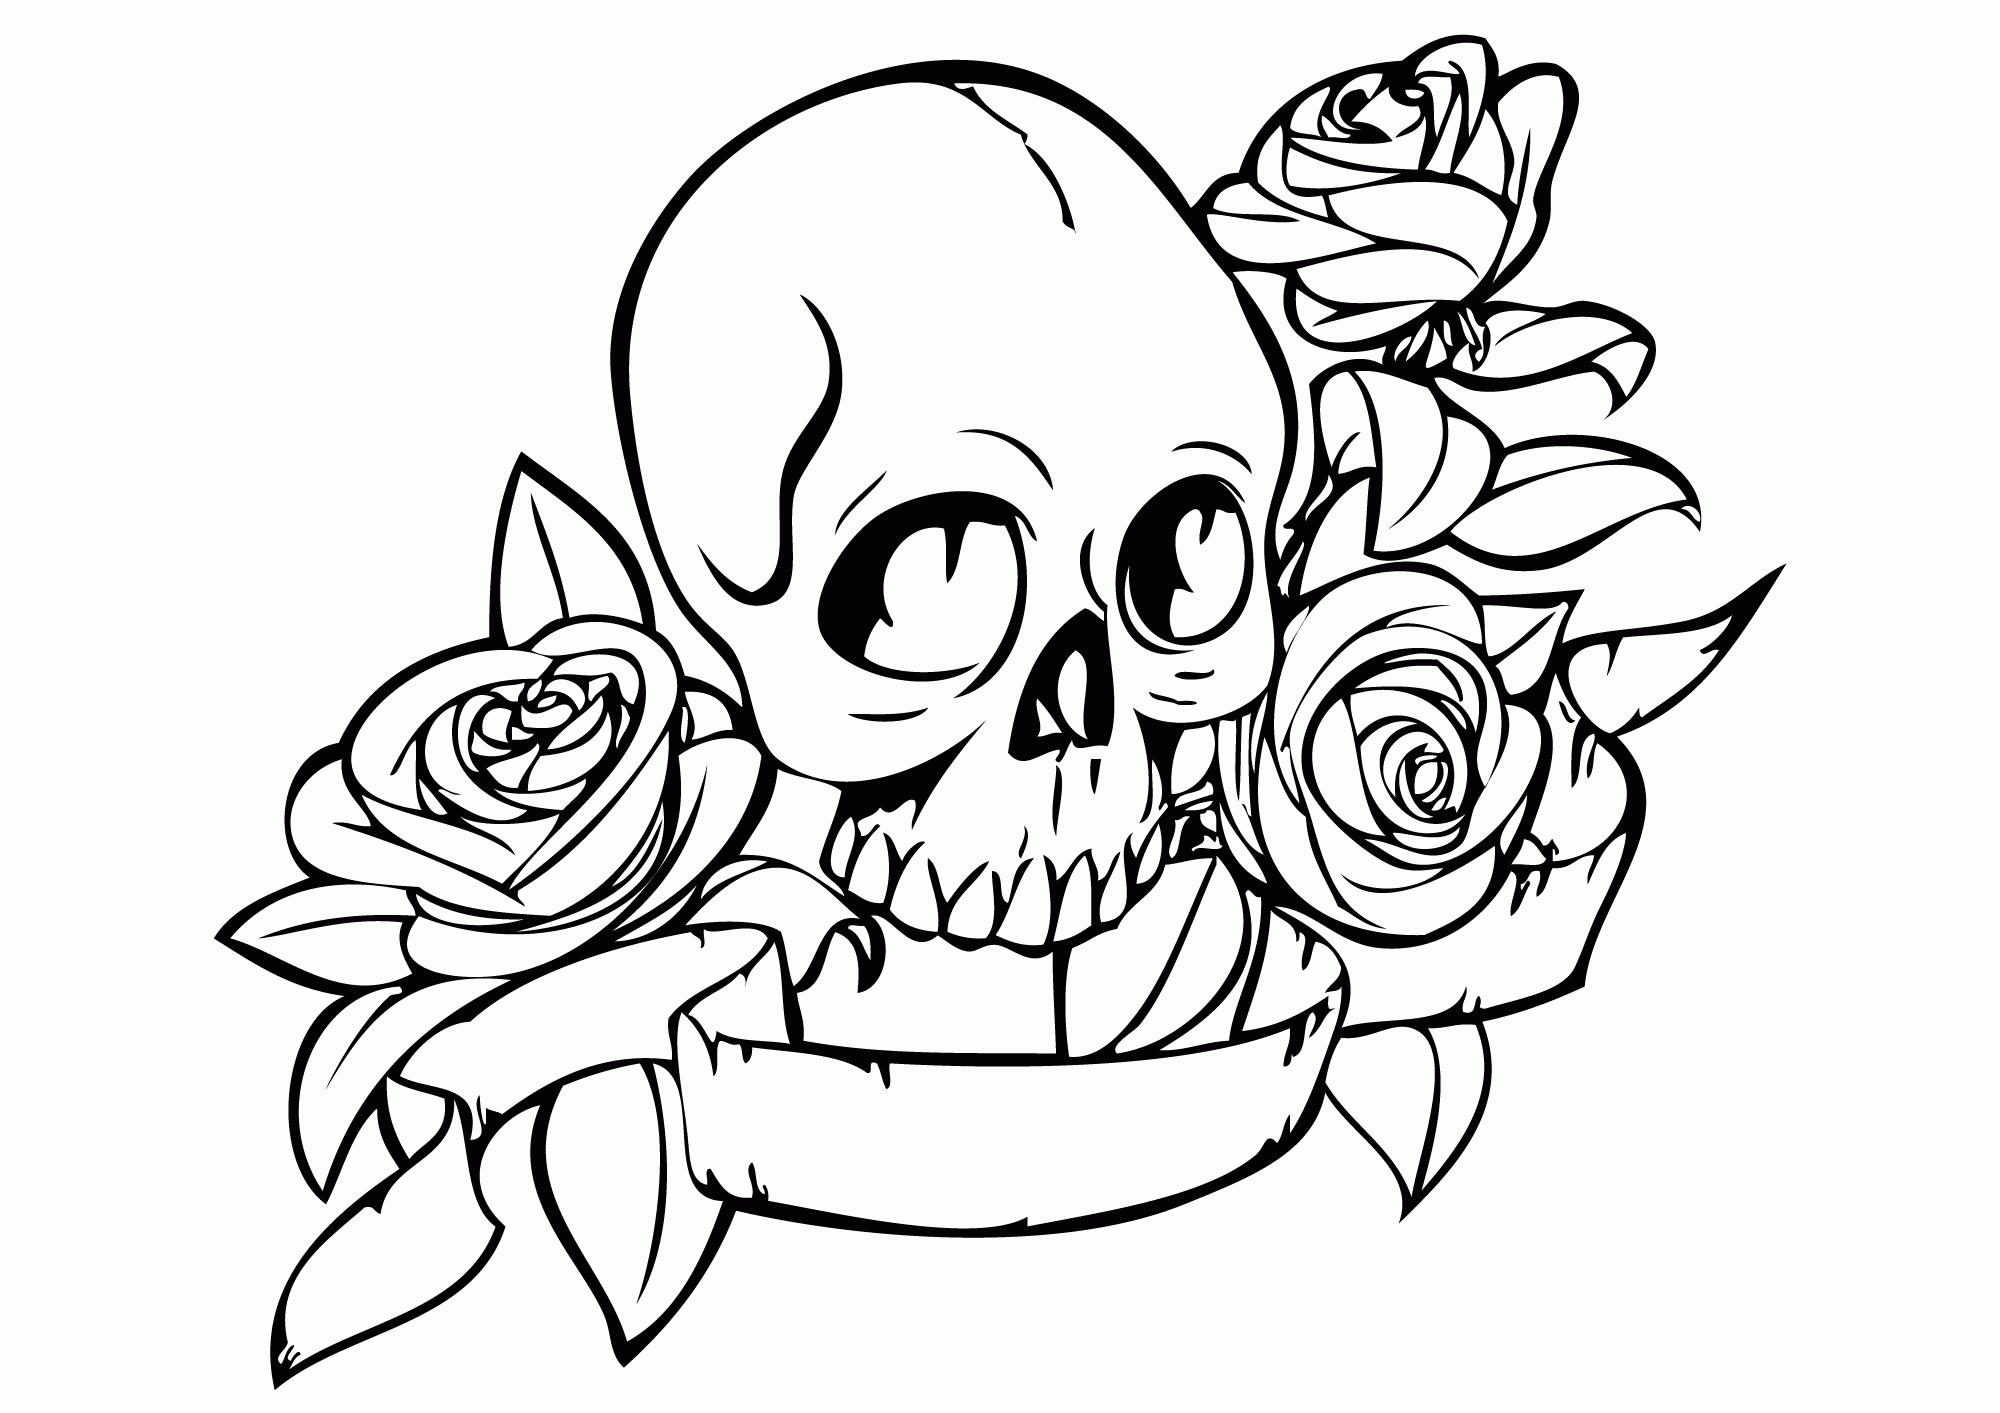 Stage Free Coloring Pages Of Sugar Skull - Widetheme